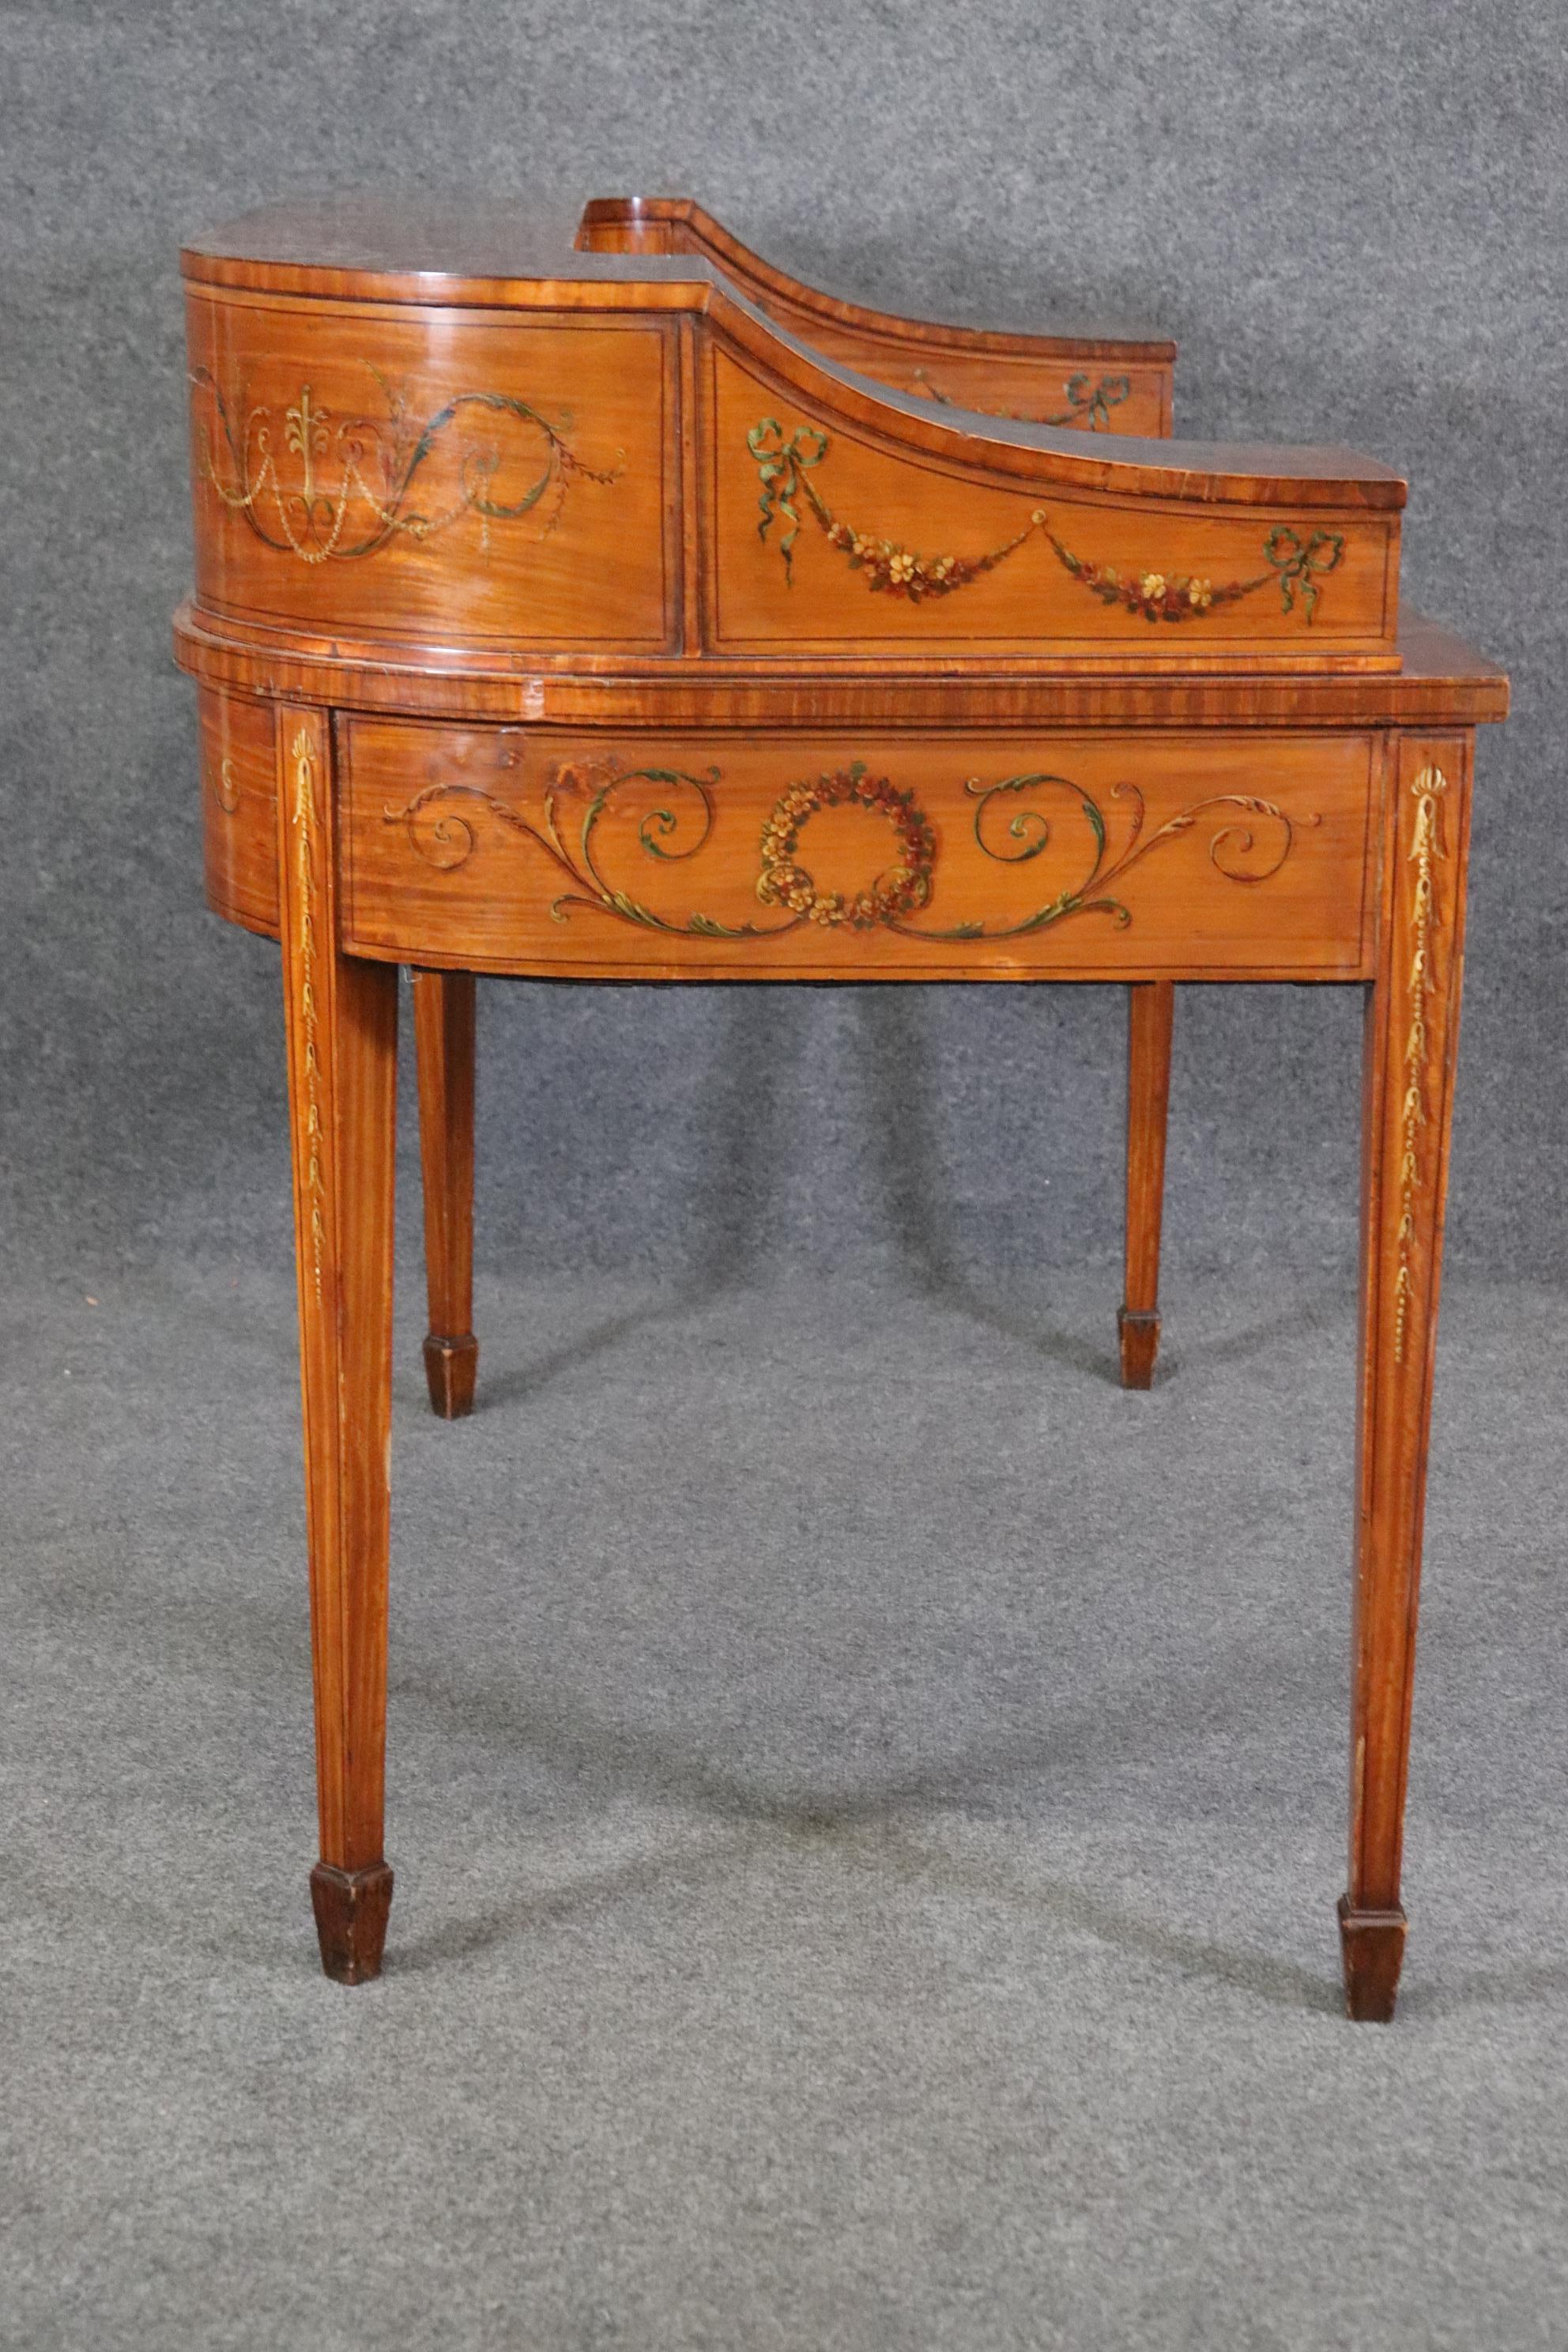 Fine Quality English Satinwood Carlton House Desk with Cherubs and Musical Theme For Sale 5